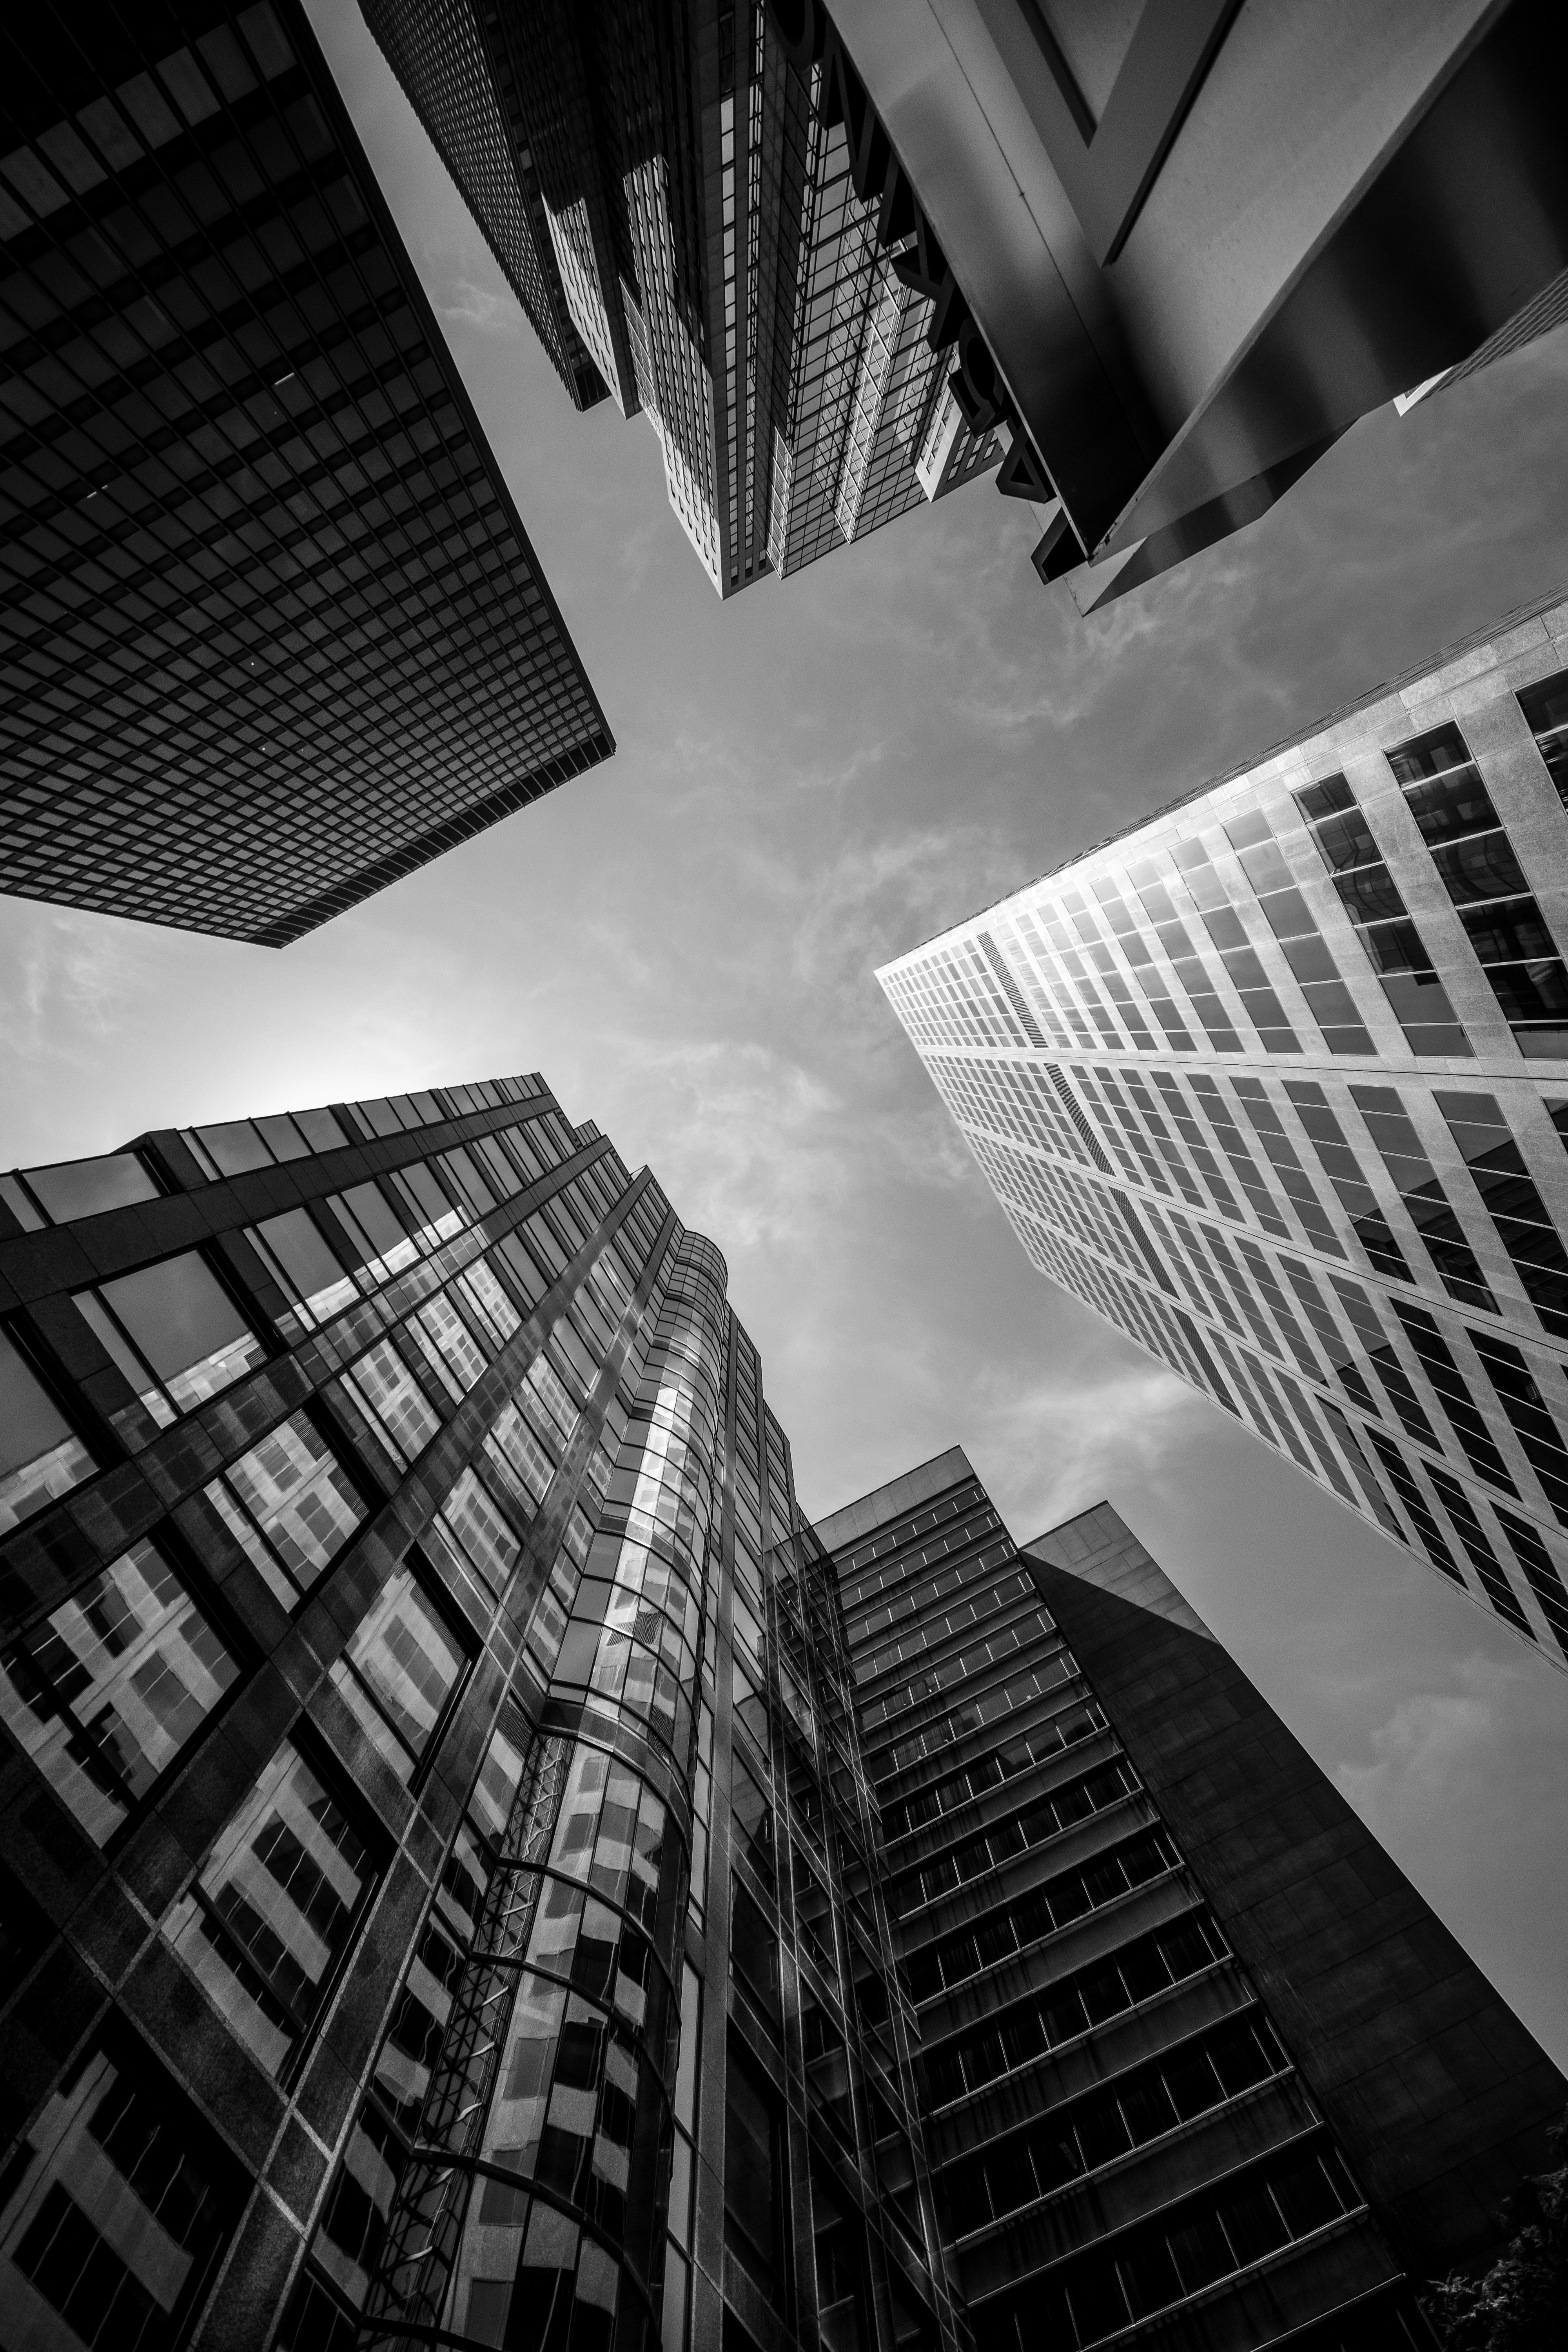 bw, miscellaneous, skyscrapers, architecture, building, chb, sky, miscellanea cell phone wallpapers